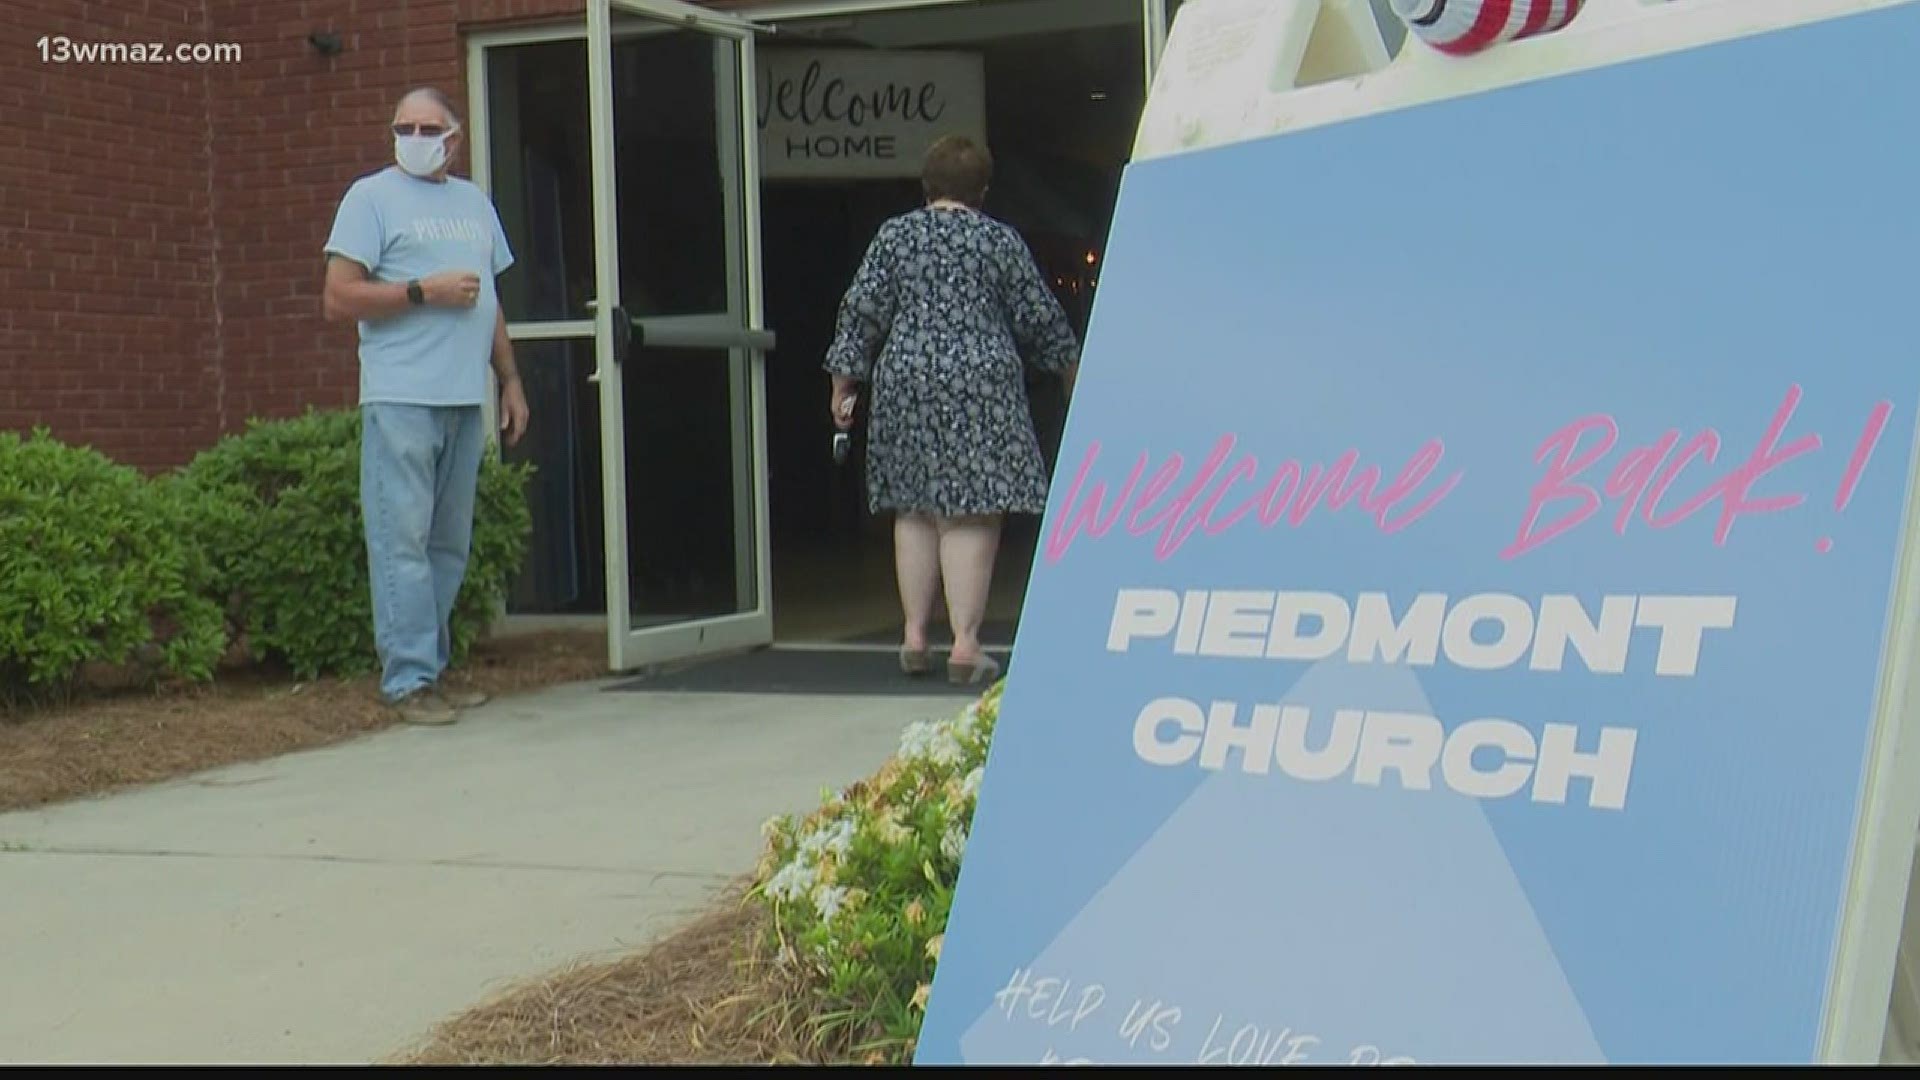 Churches began reopening in Central Georgia.